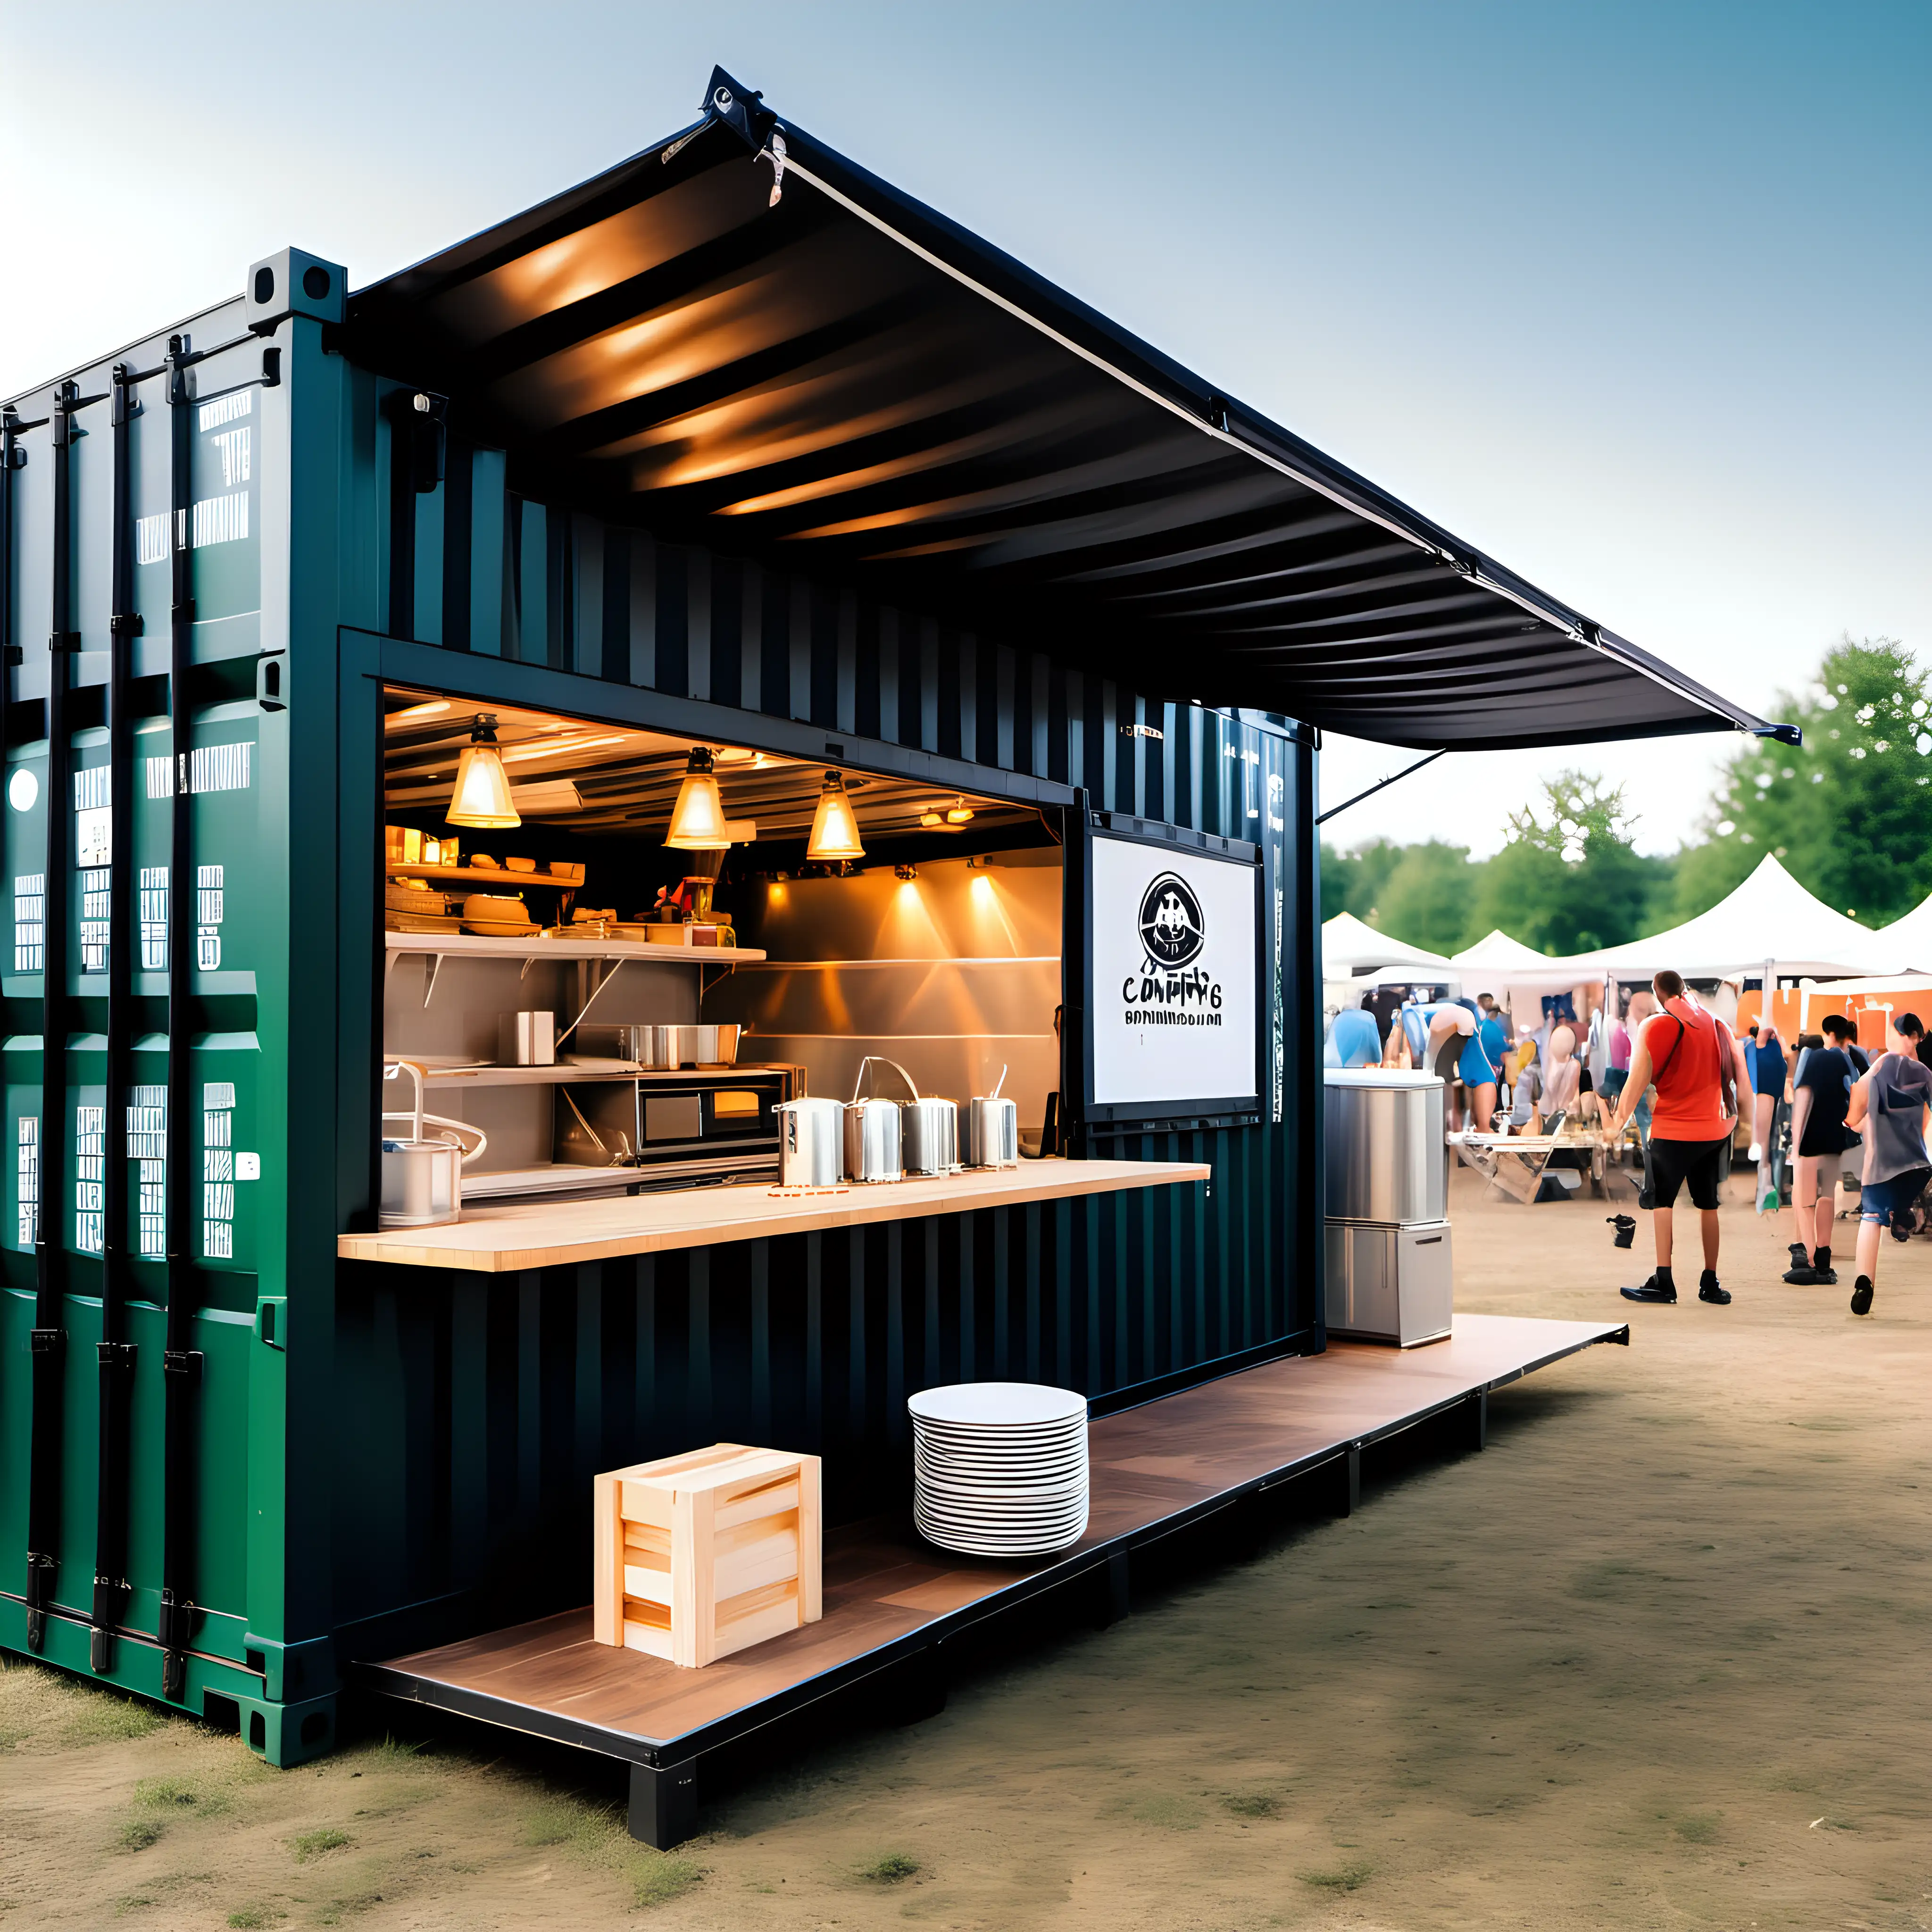 Festival Camping Food Outlet Sea Container Kitchen Serving Festive Fare